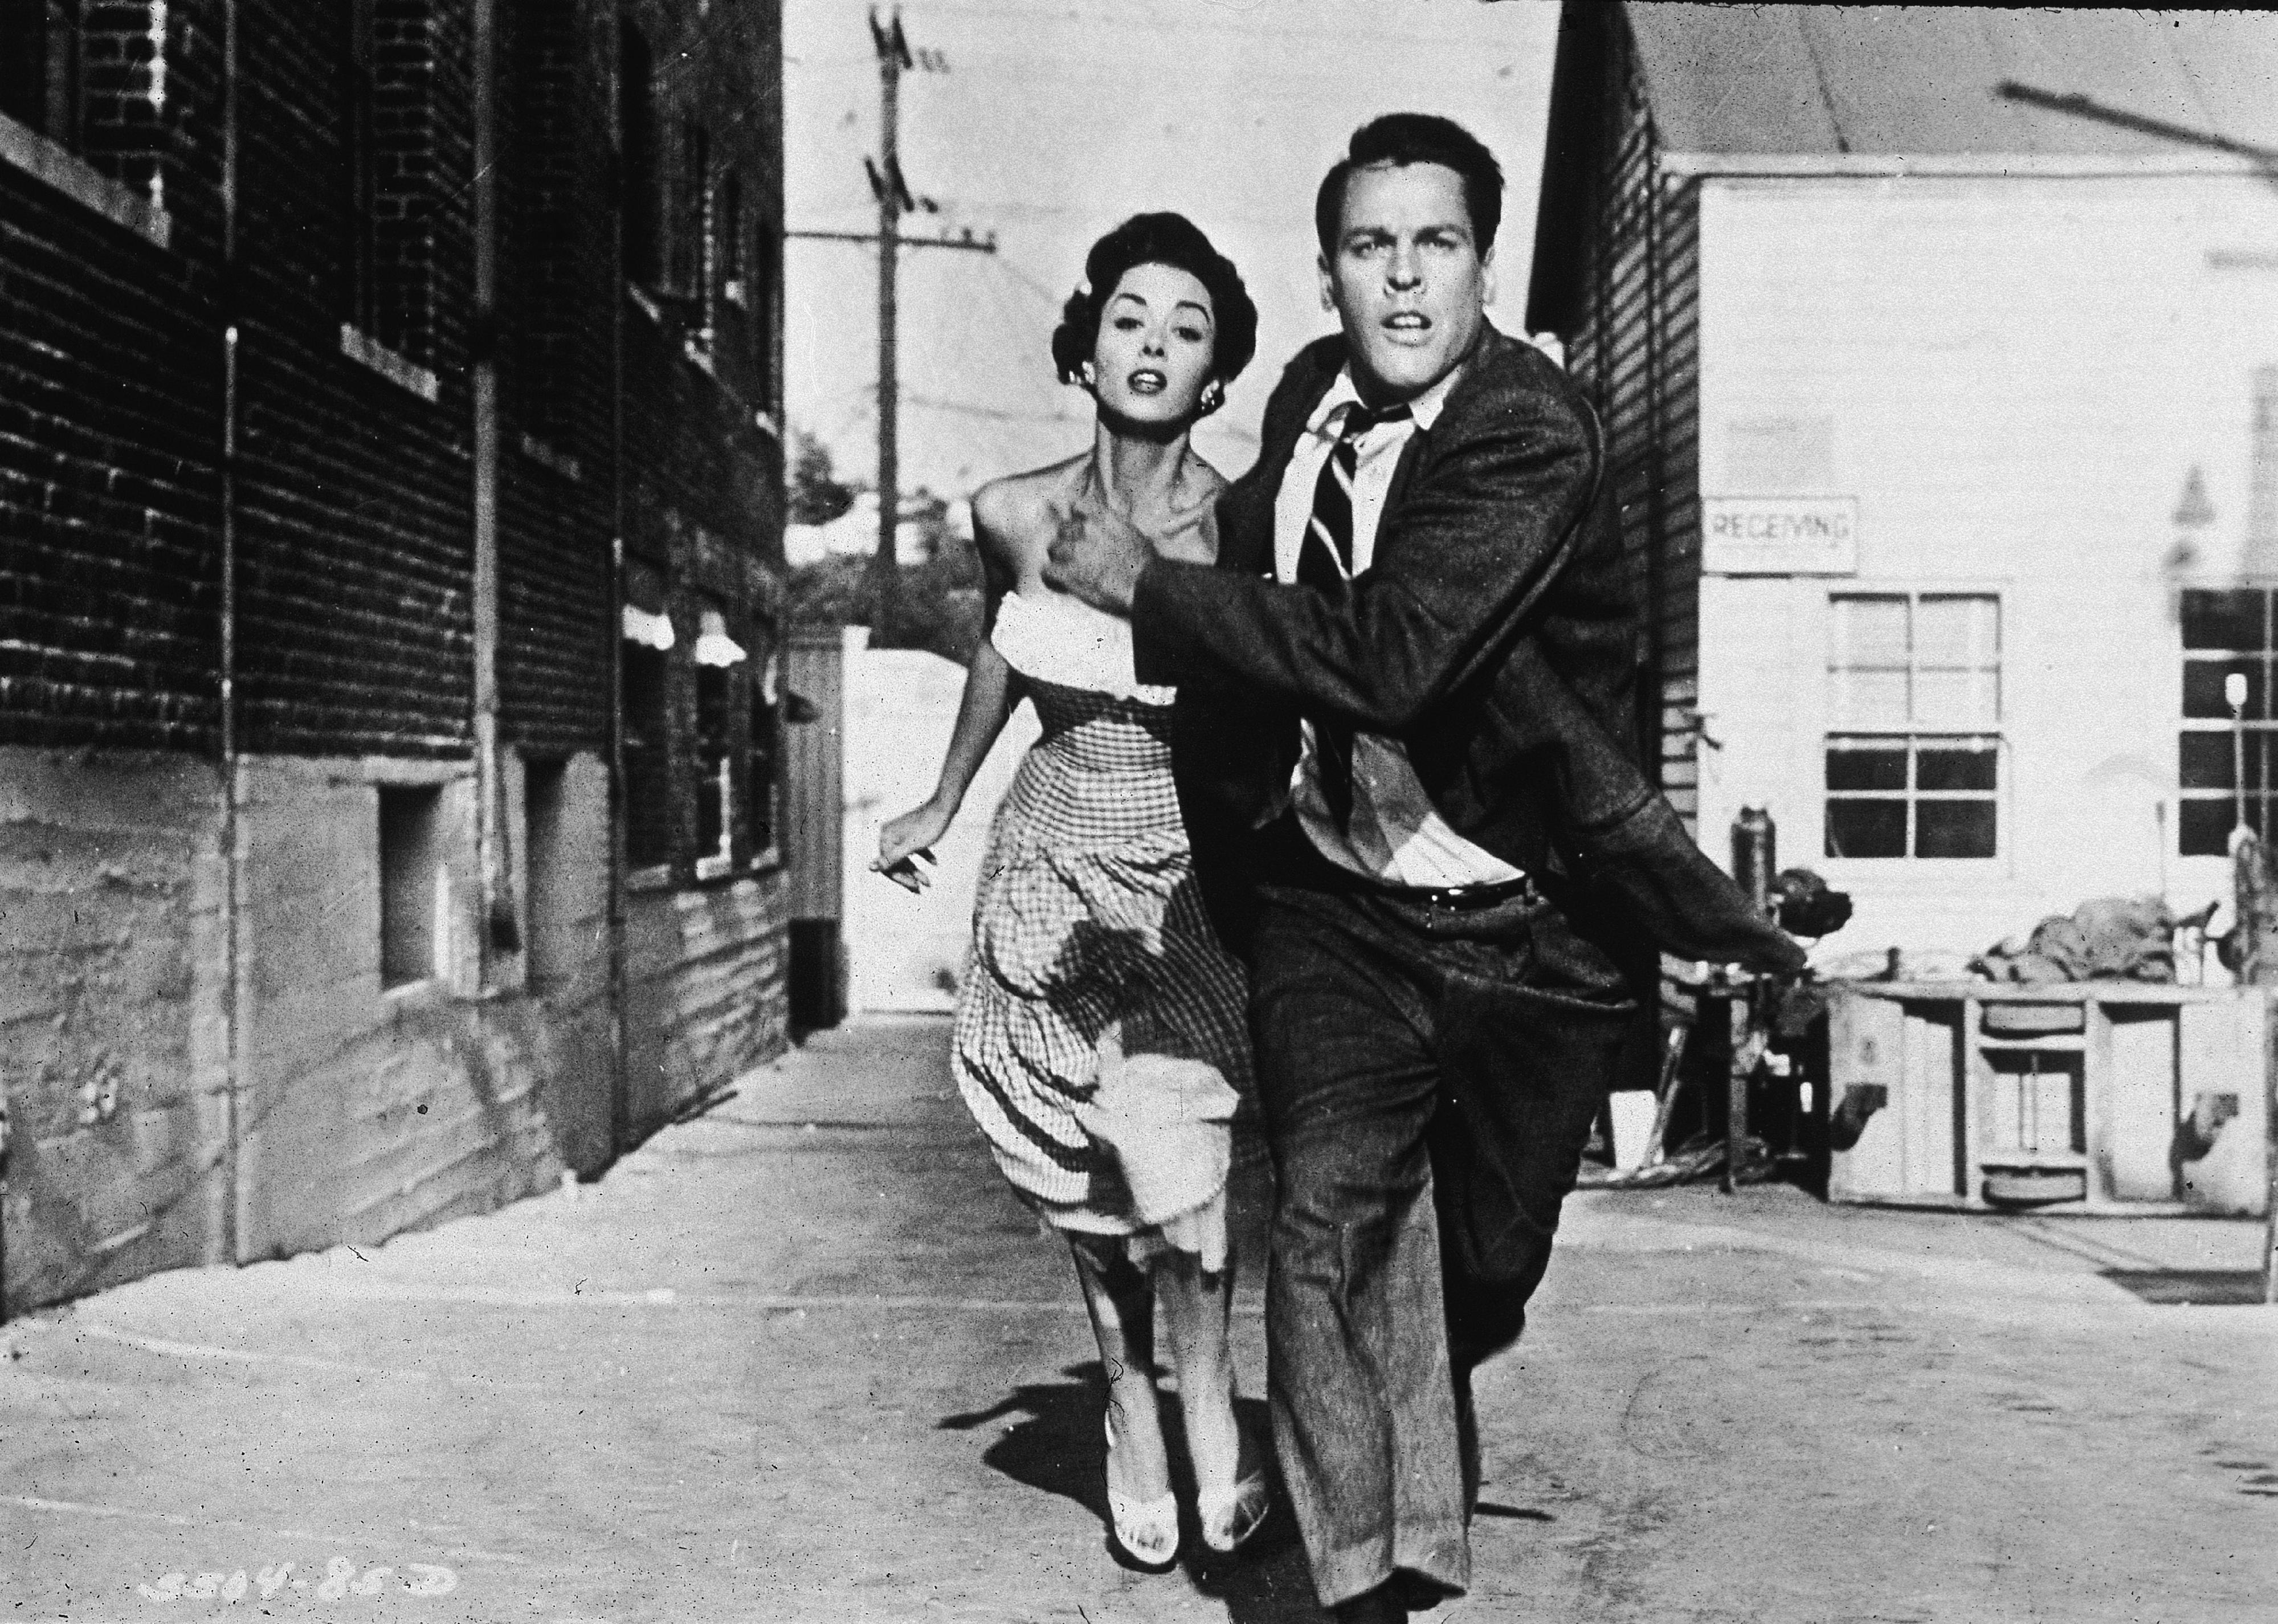 A man in a suit and a woman in a strapless dress run down the street looking scared.